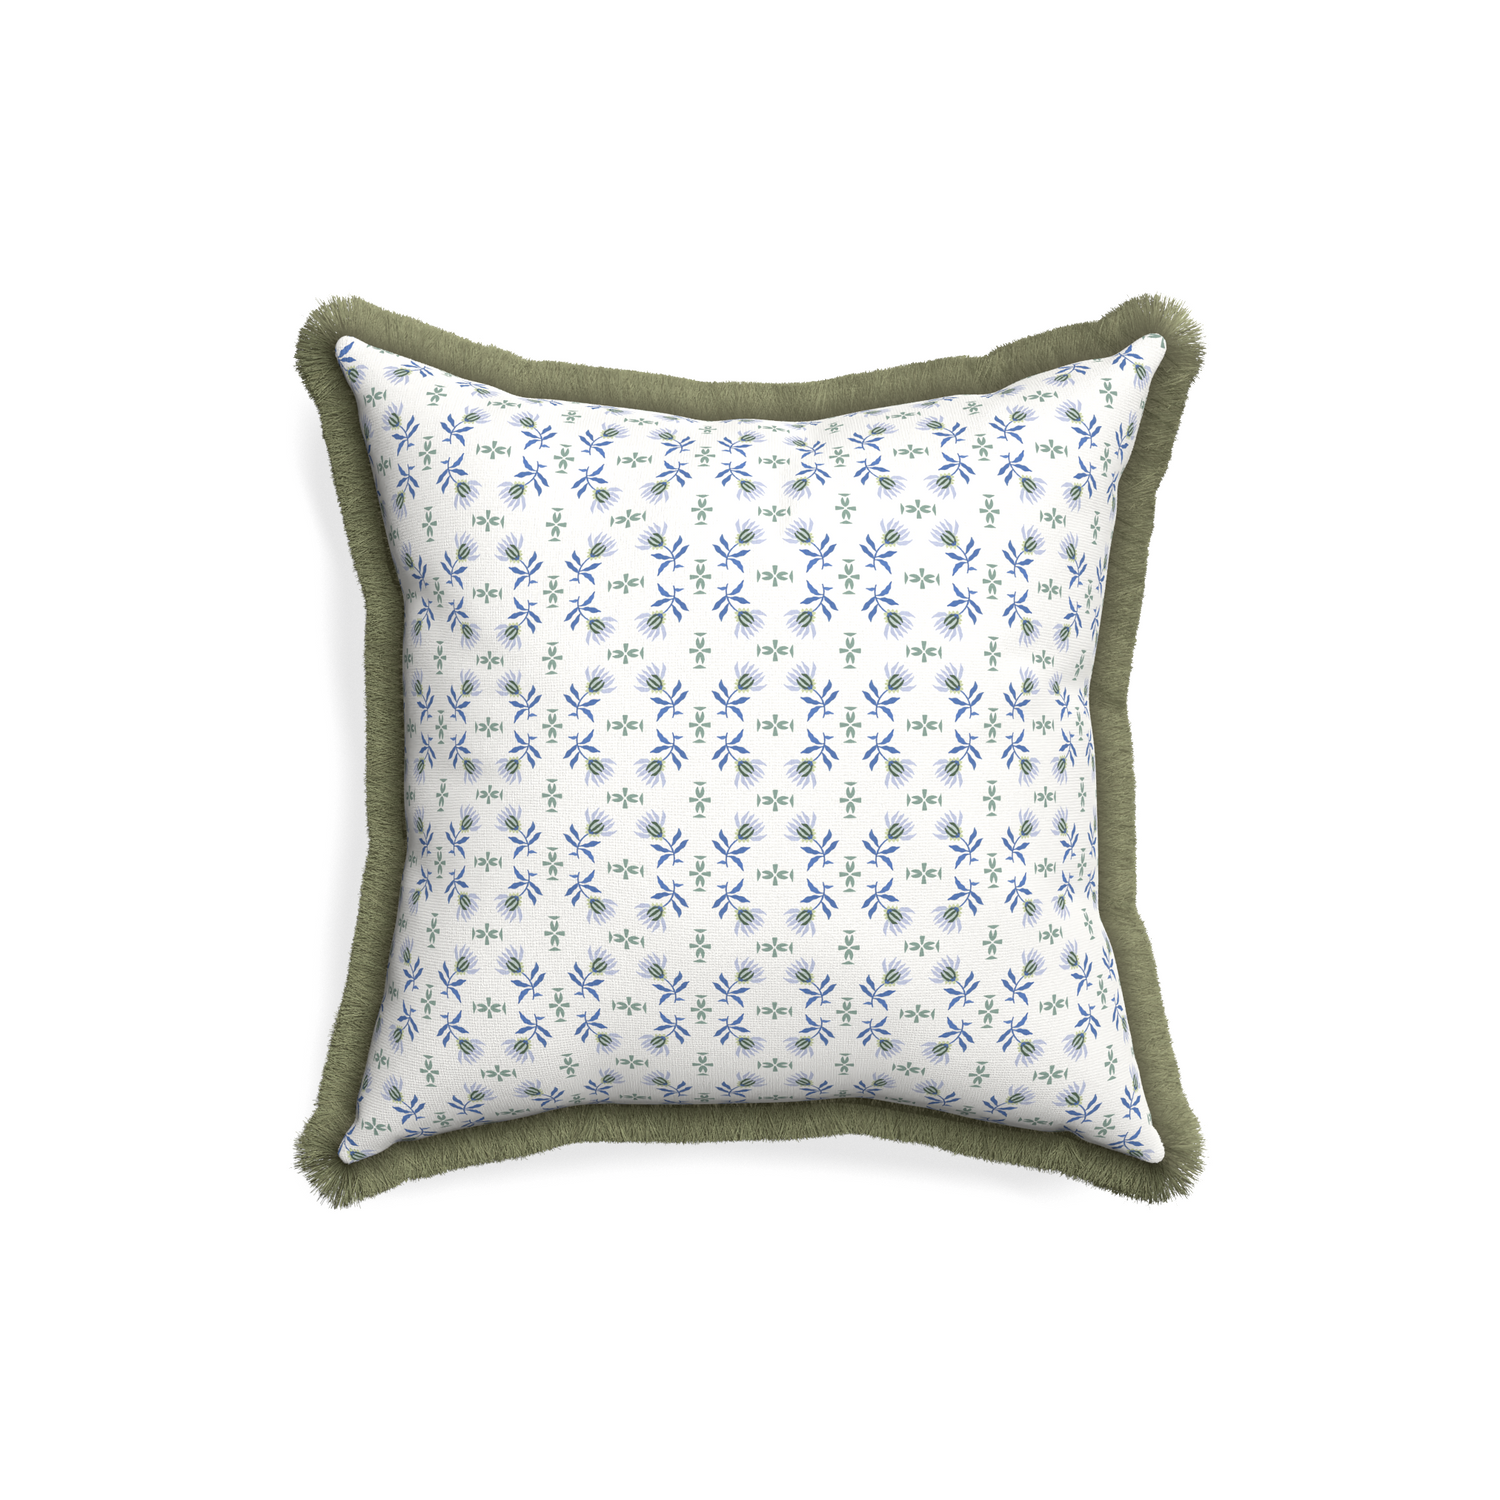 18-square lee custom pillow with sage fringe on white background